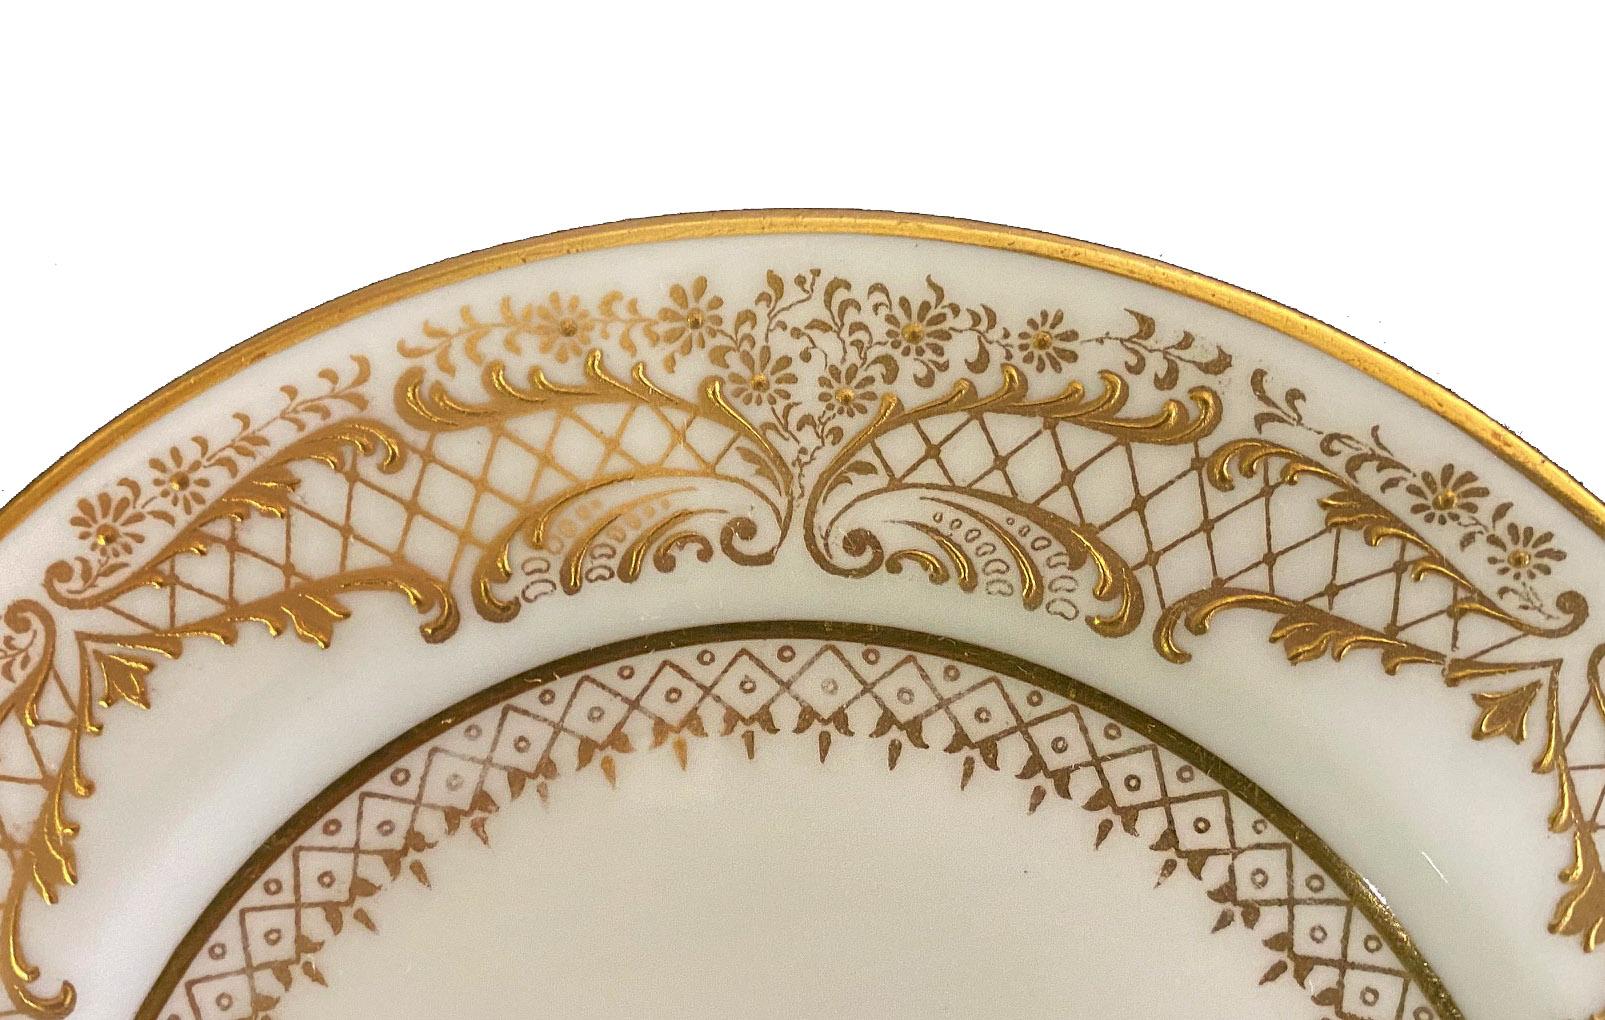 Belle Époque Lovely Set of Fourteen Early 20th Century English Royal Doulton Bread Plates